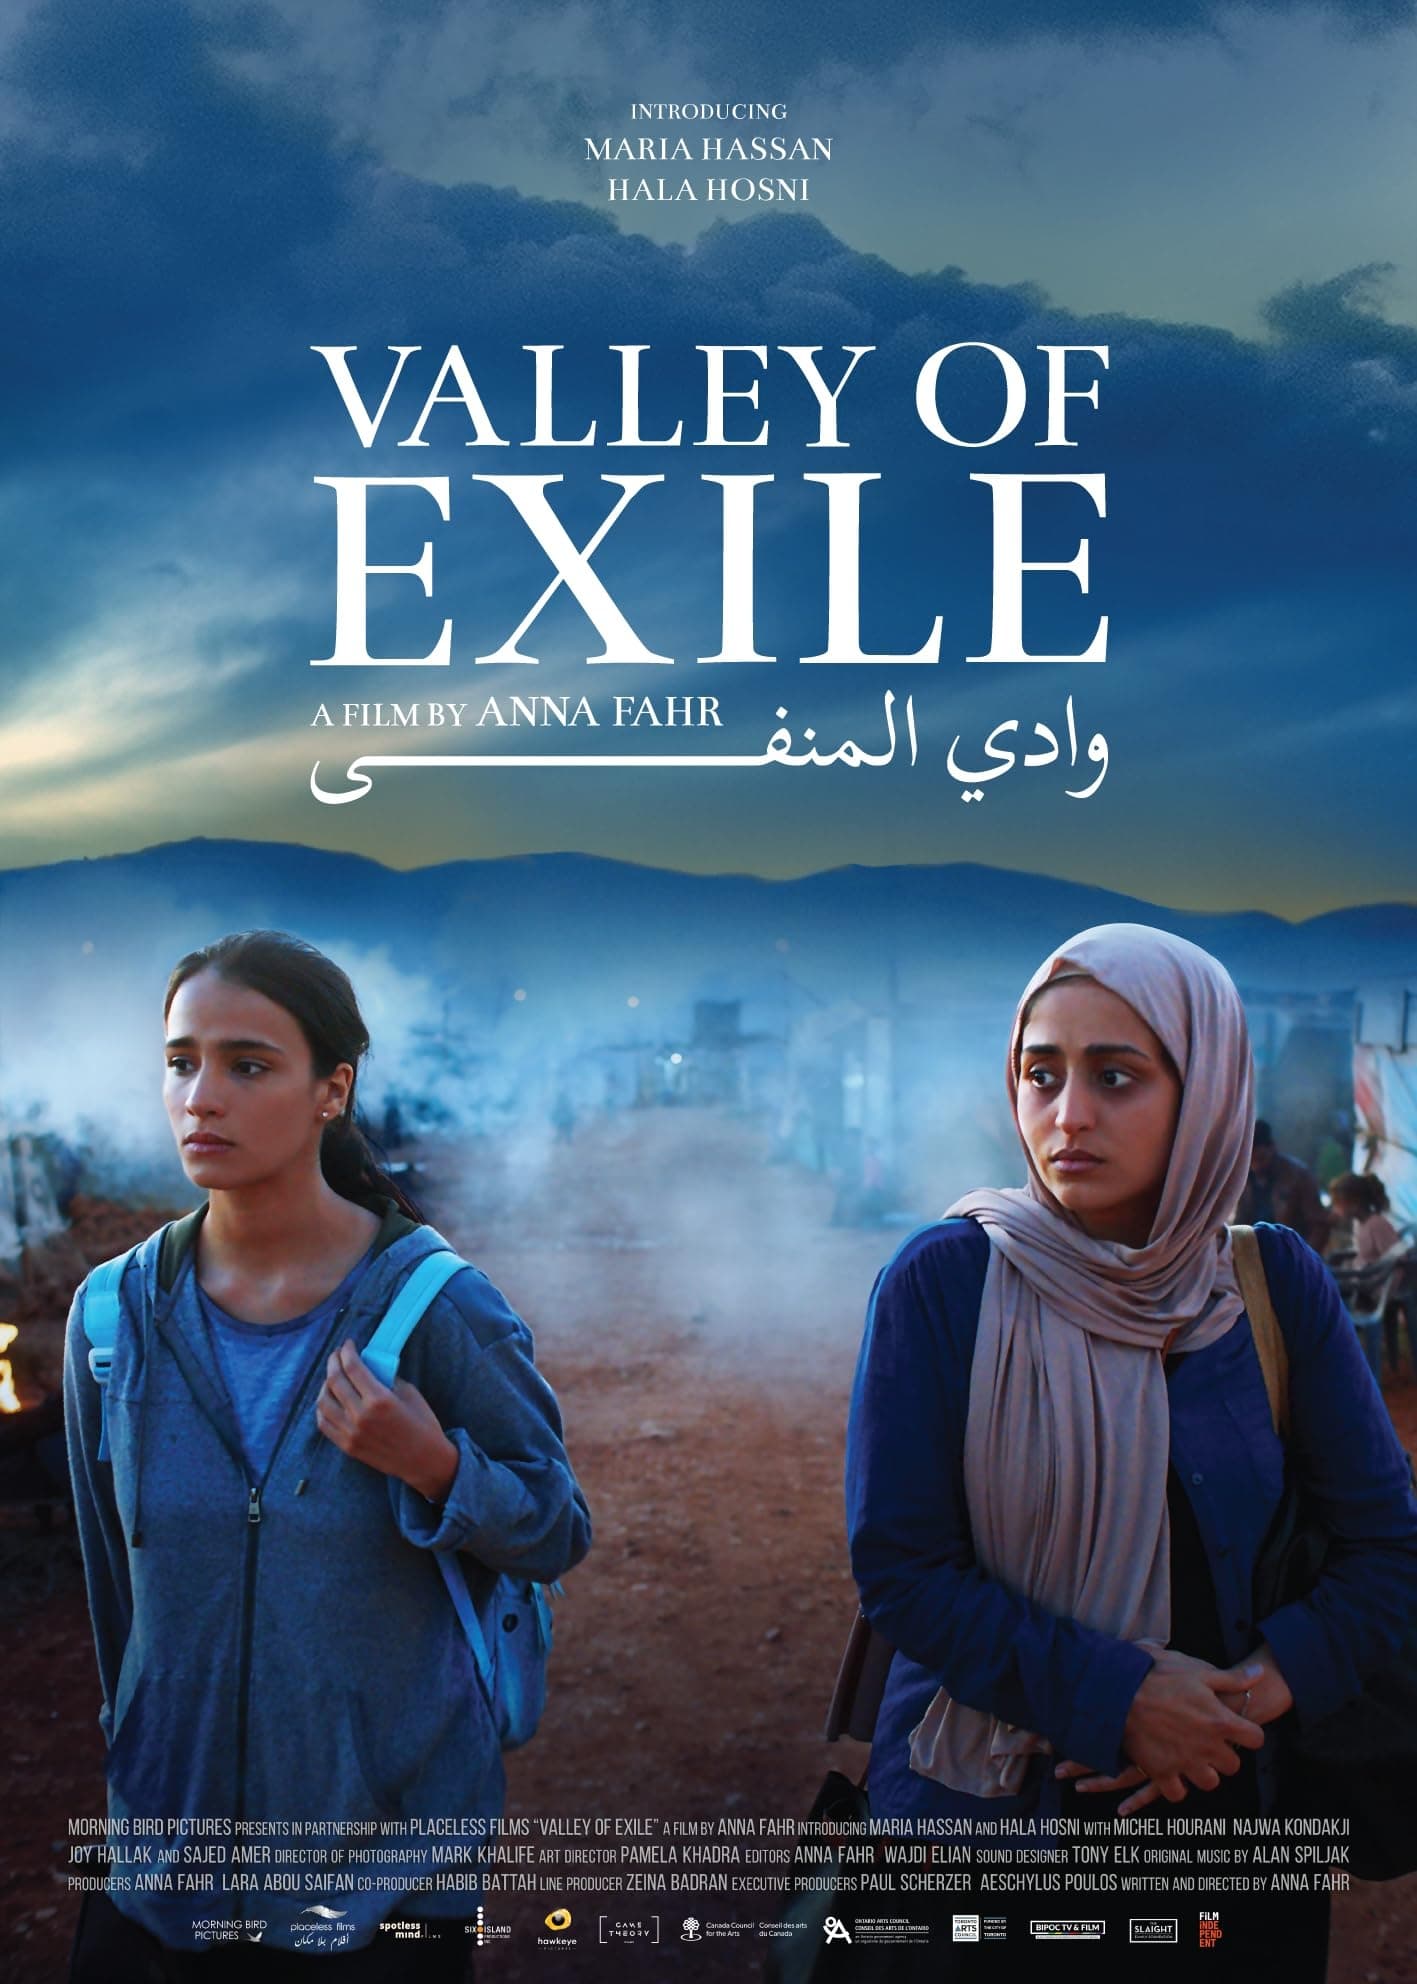 Valley of Exile